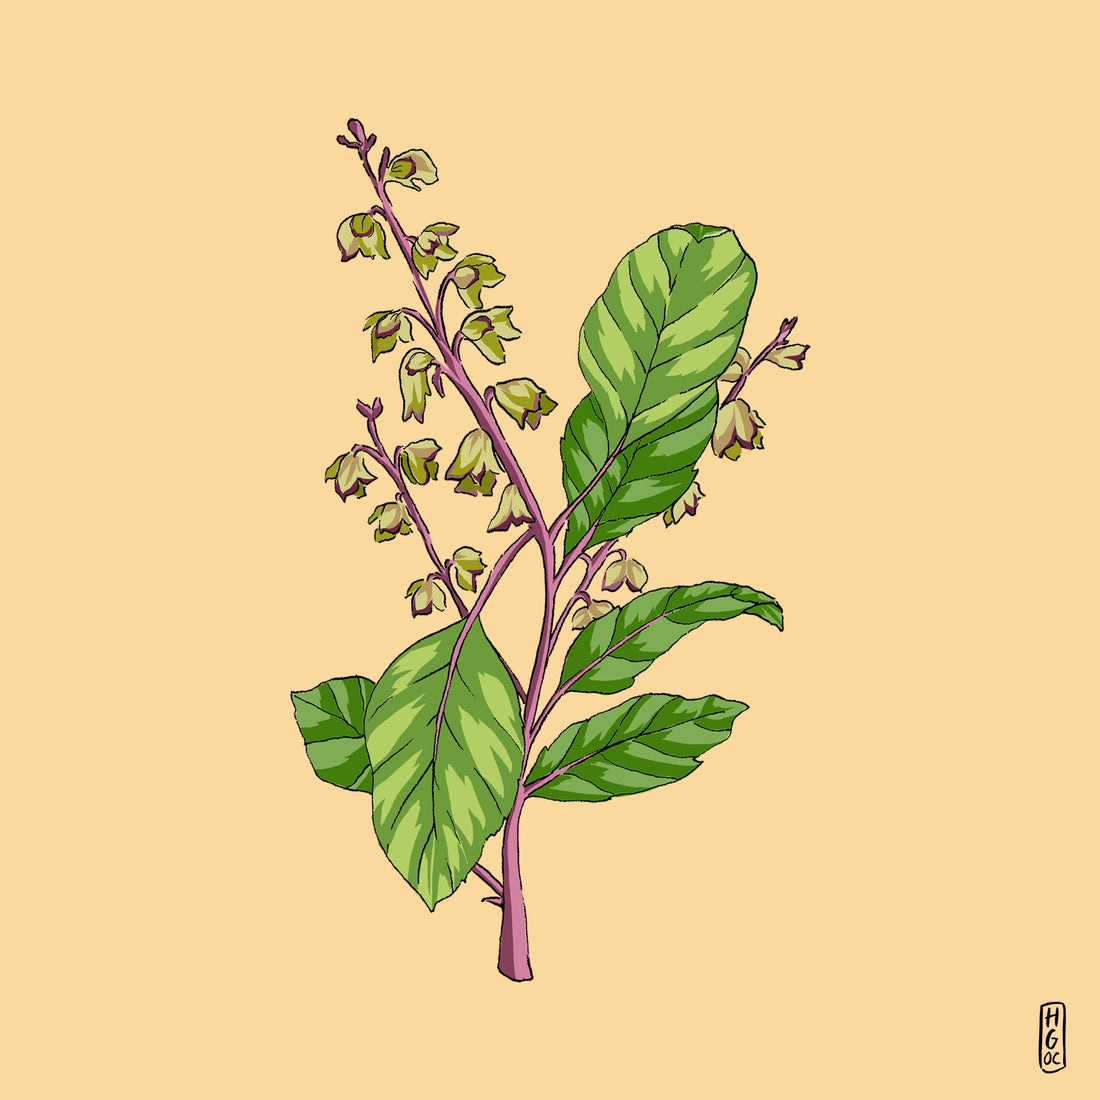 Tulsi: A herb to build resilience